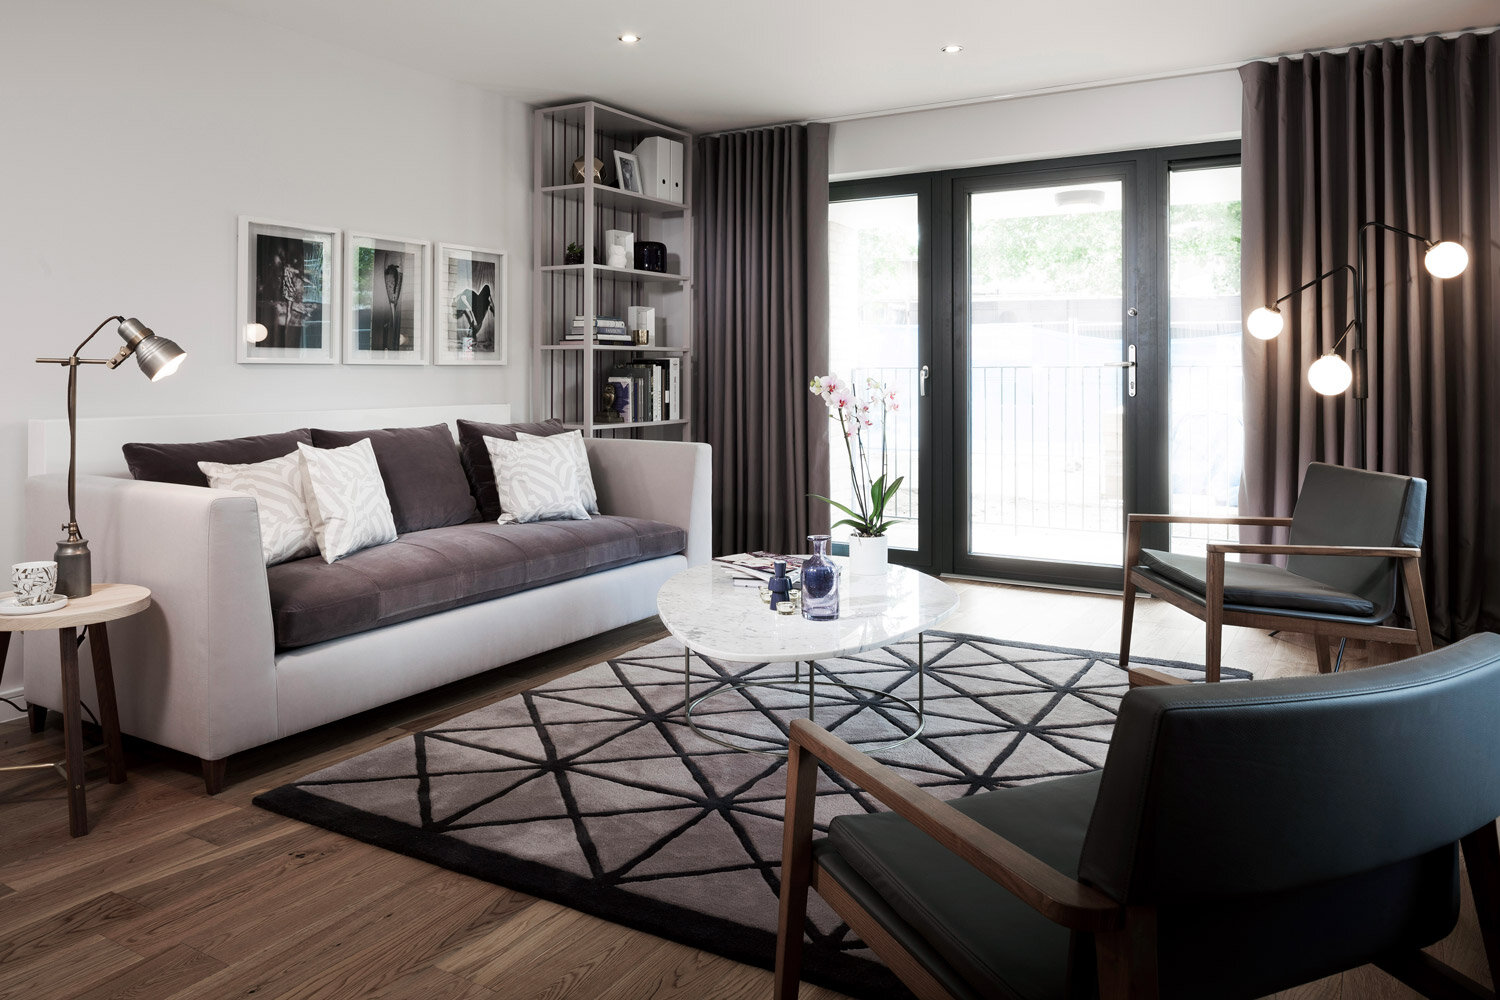 housing-new-home-showhome-imagery